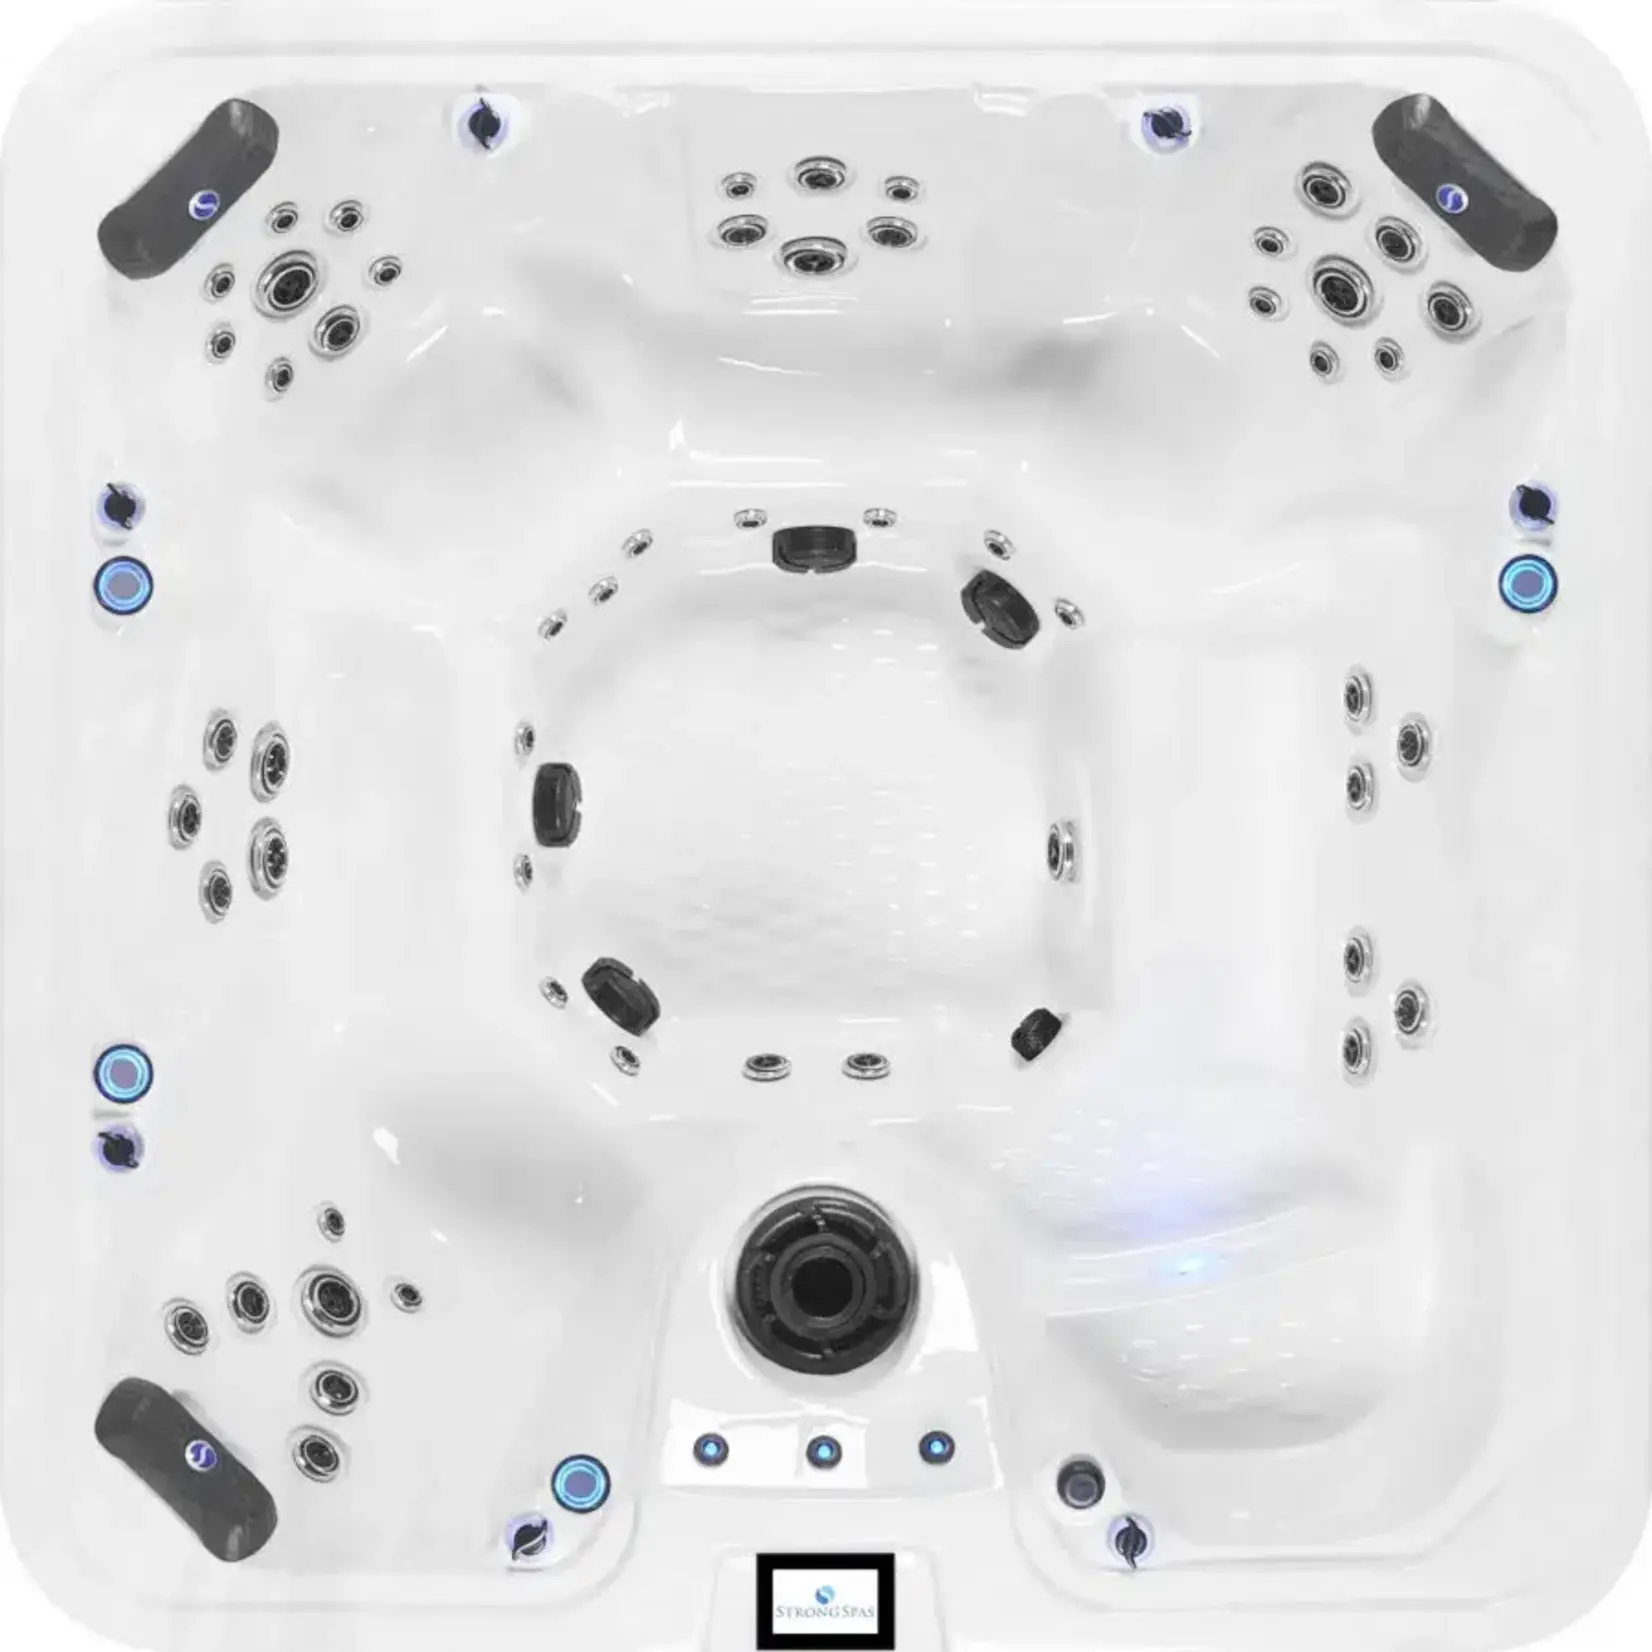 STRONG SPAS SUMMIT SERIES - S60 - and comes with --> ( Dura-shield hard cover, Dura-base, water columns LED lights, exterior cabinet led's led cup holders, spatouch full color touch screen, ozonator